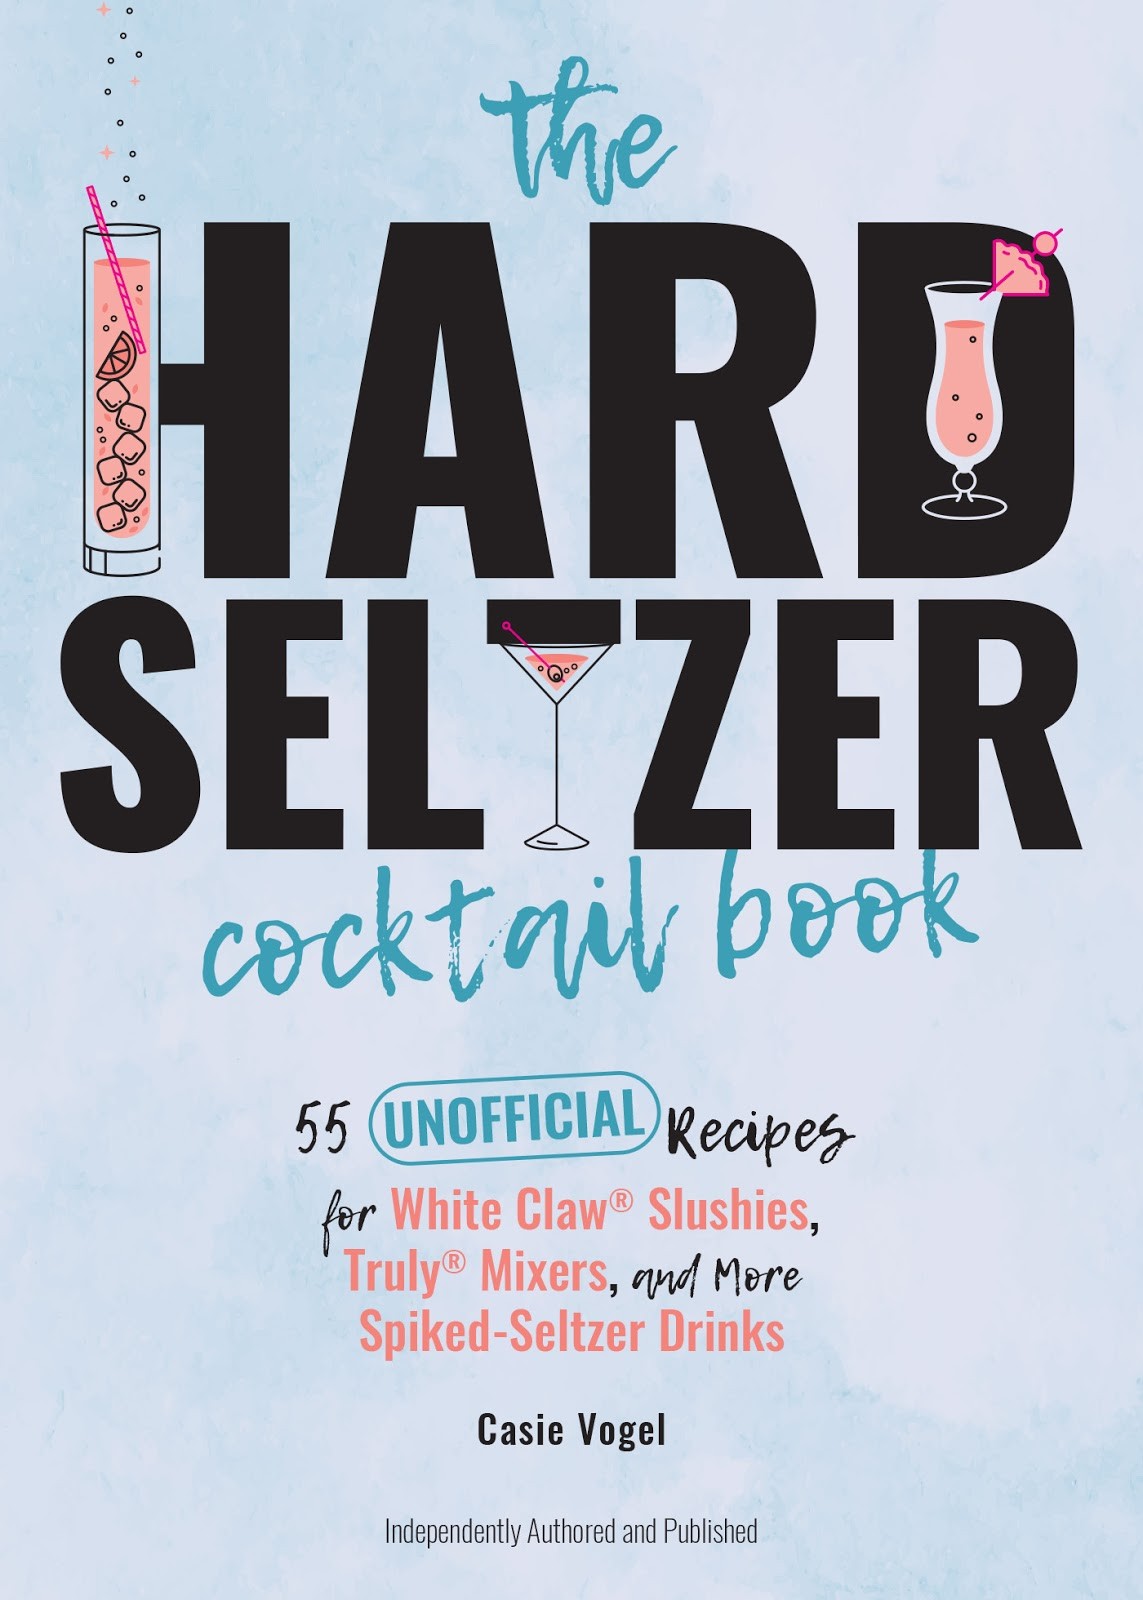 ~The Hard Seltzer Cocktail Book!